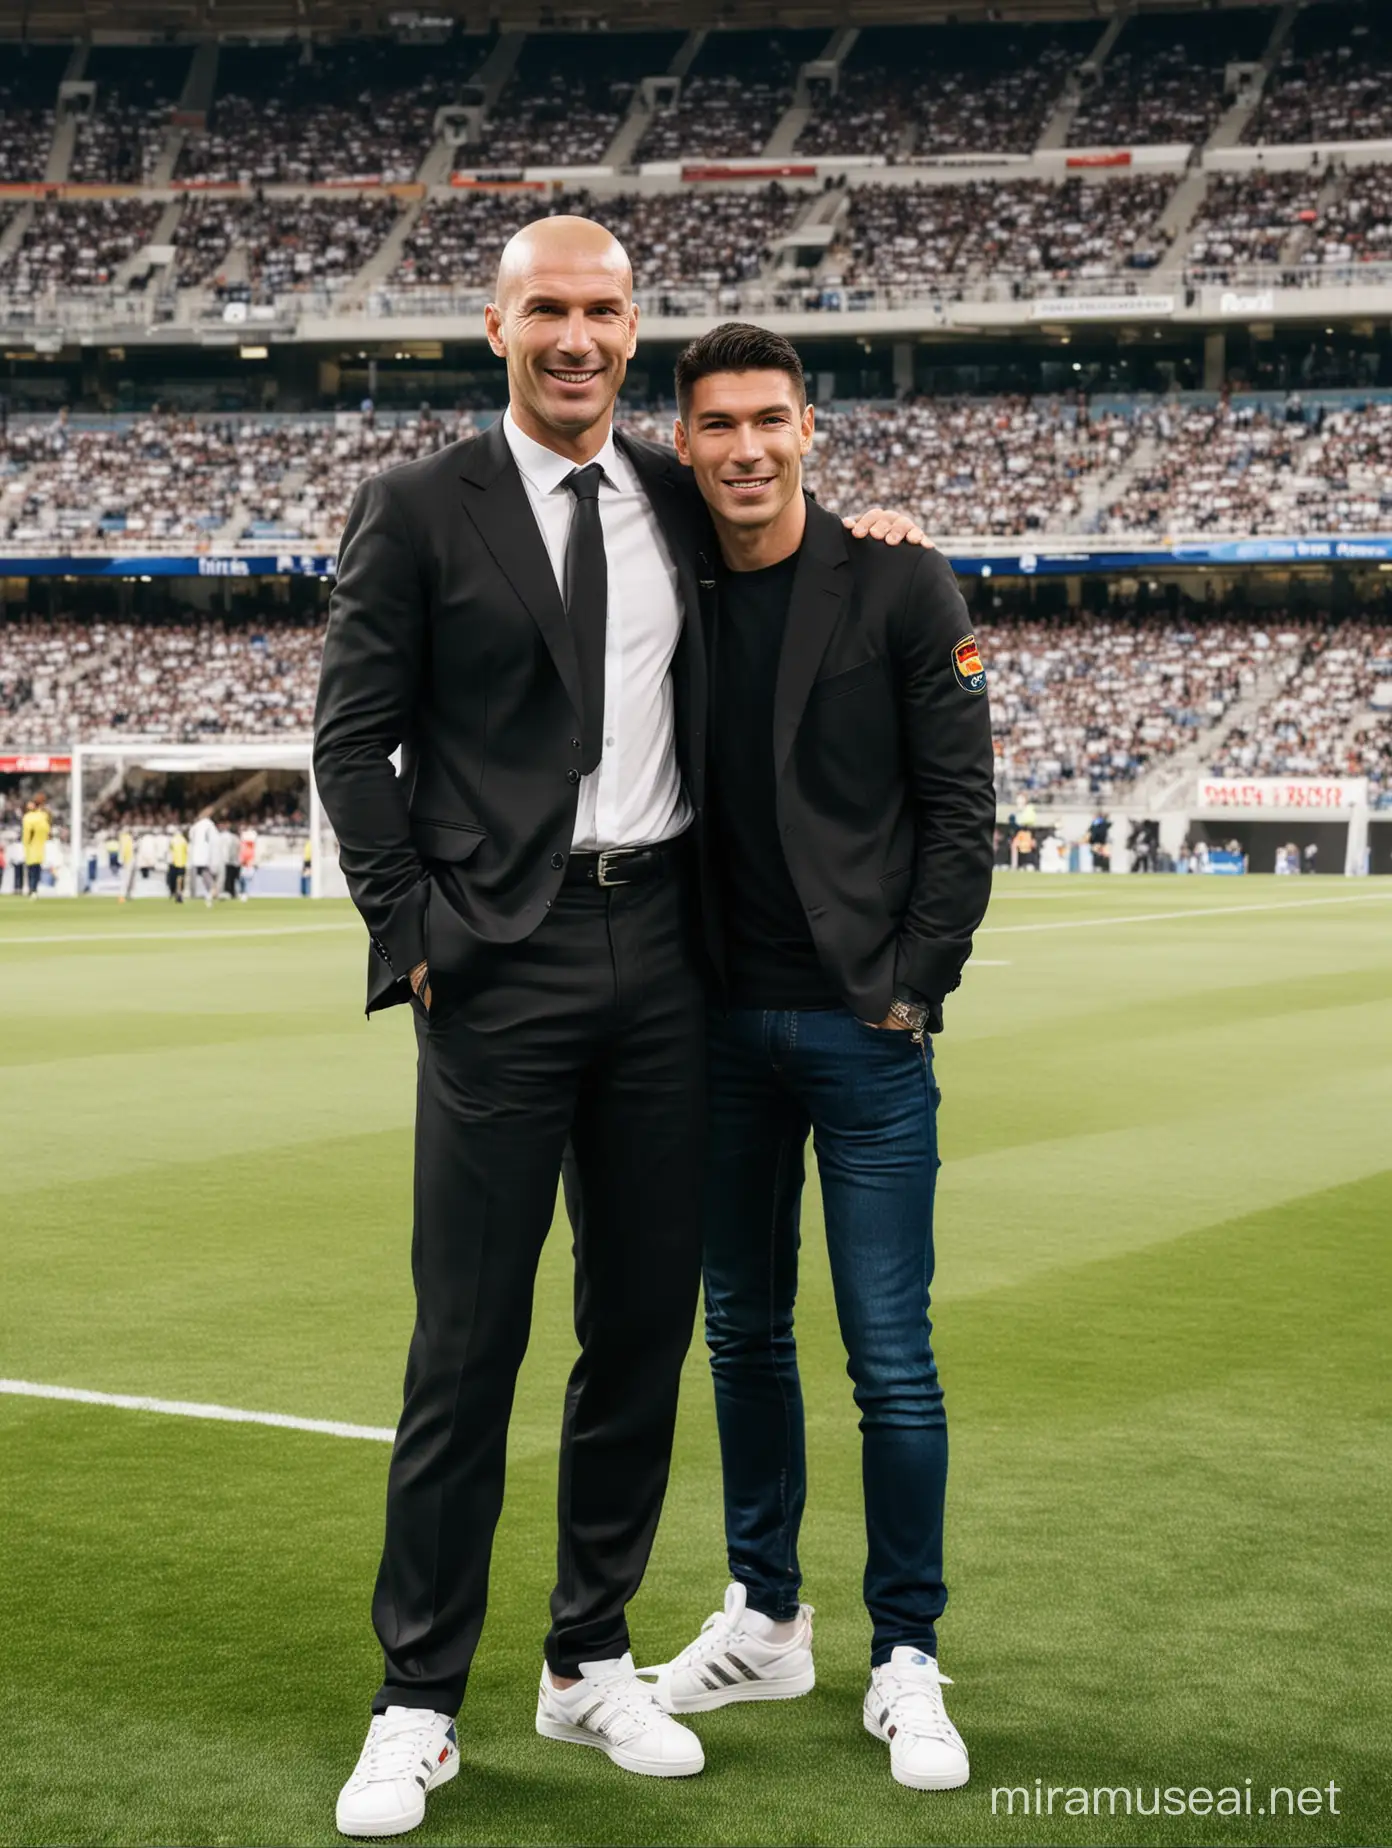 Zindine Zidane in Black Suit with Real Madrid Fan at Stadium